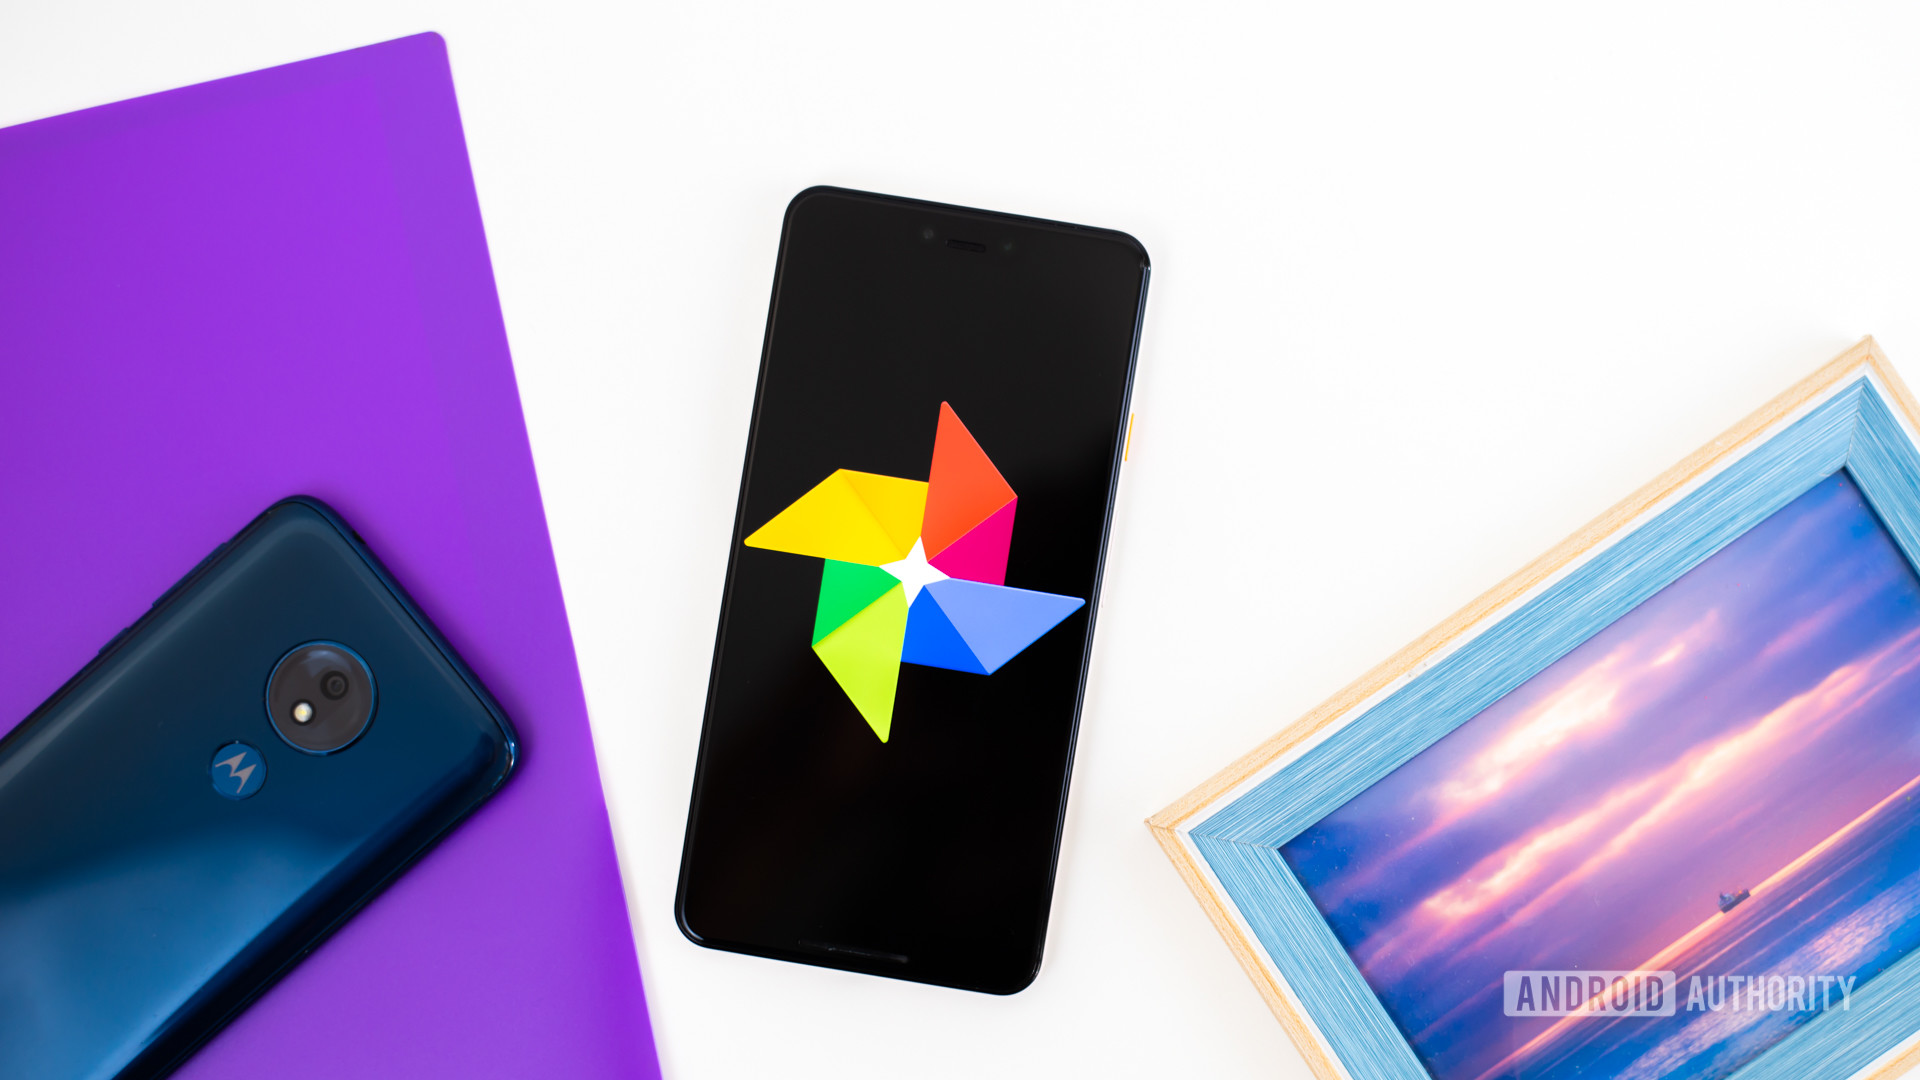 Google Photos logo on smartphone next to imaging accessories stock photo 1